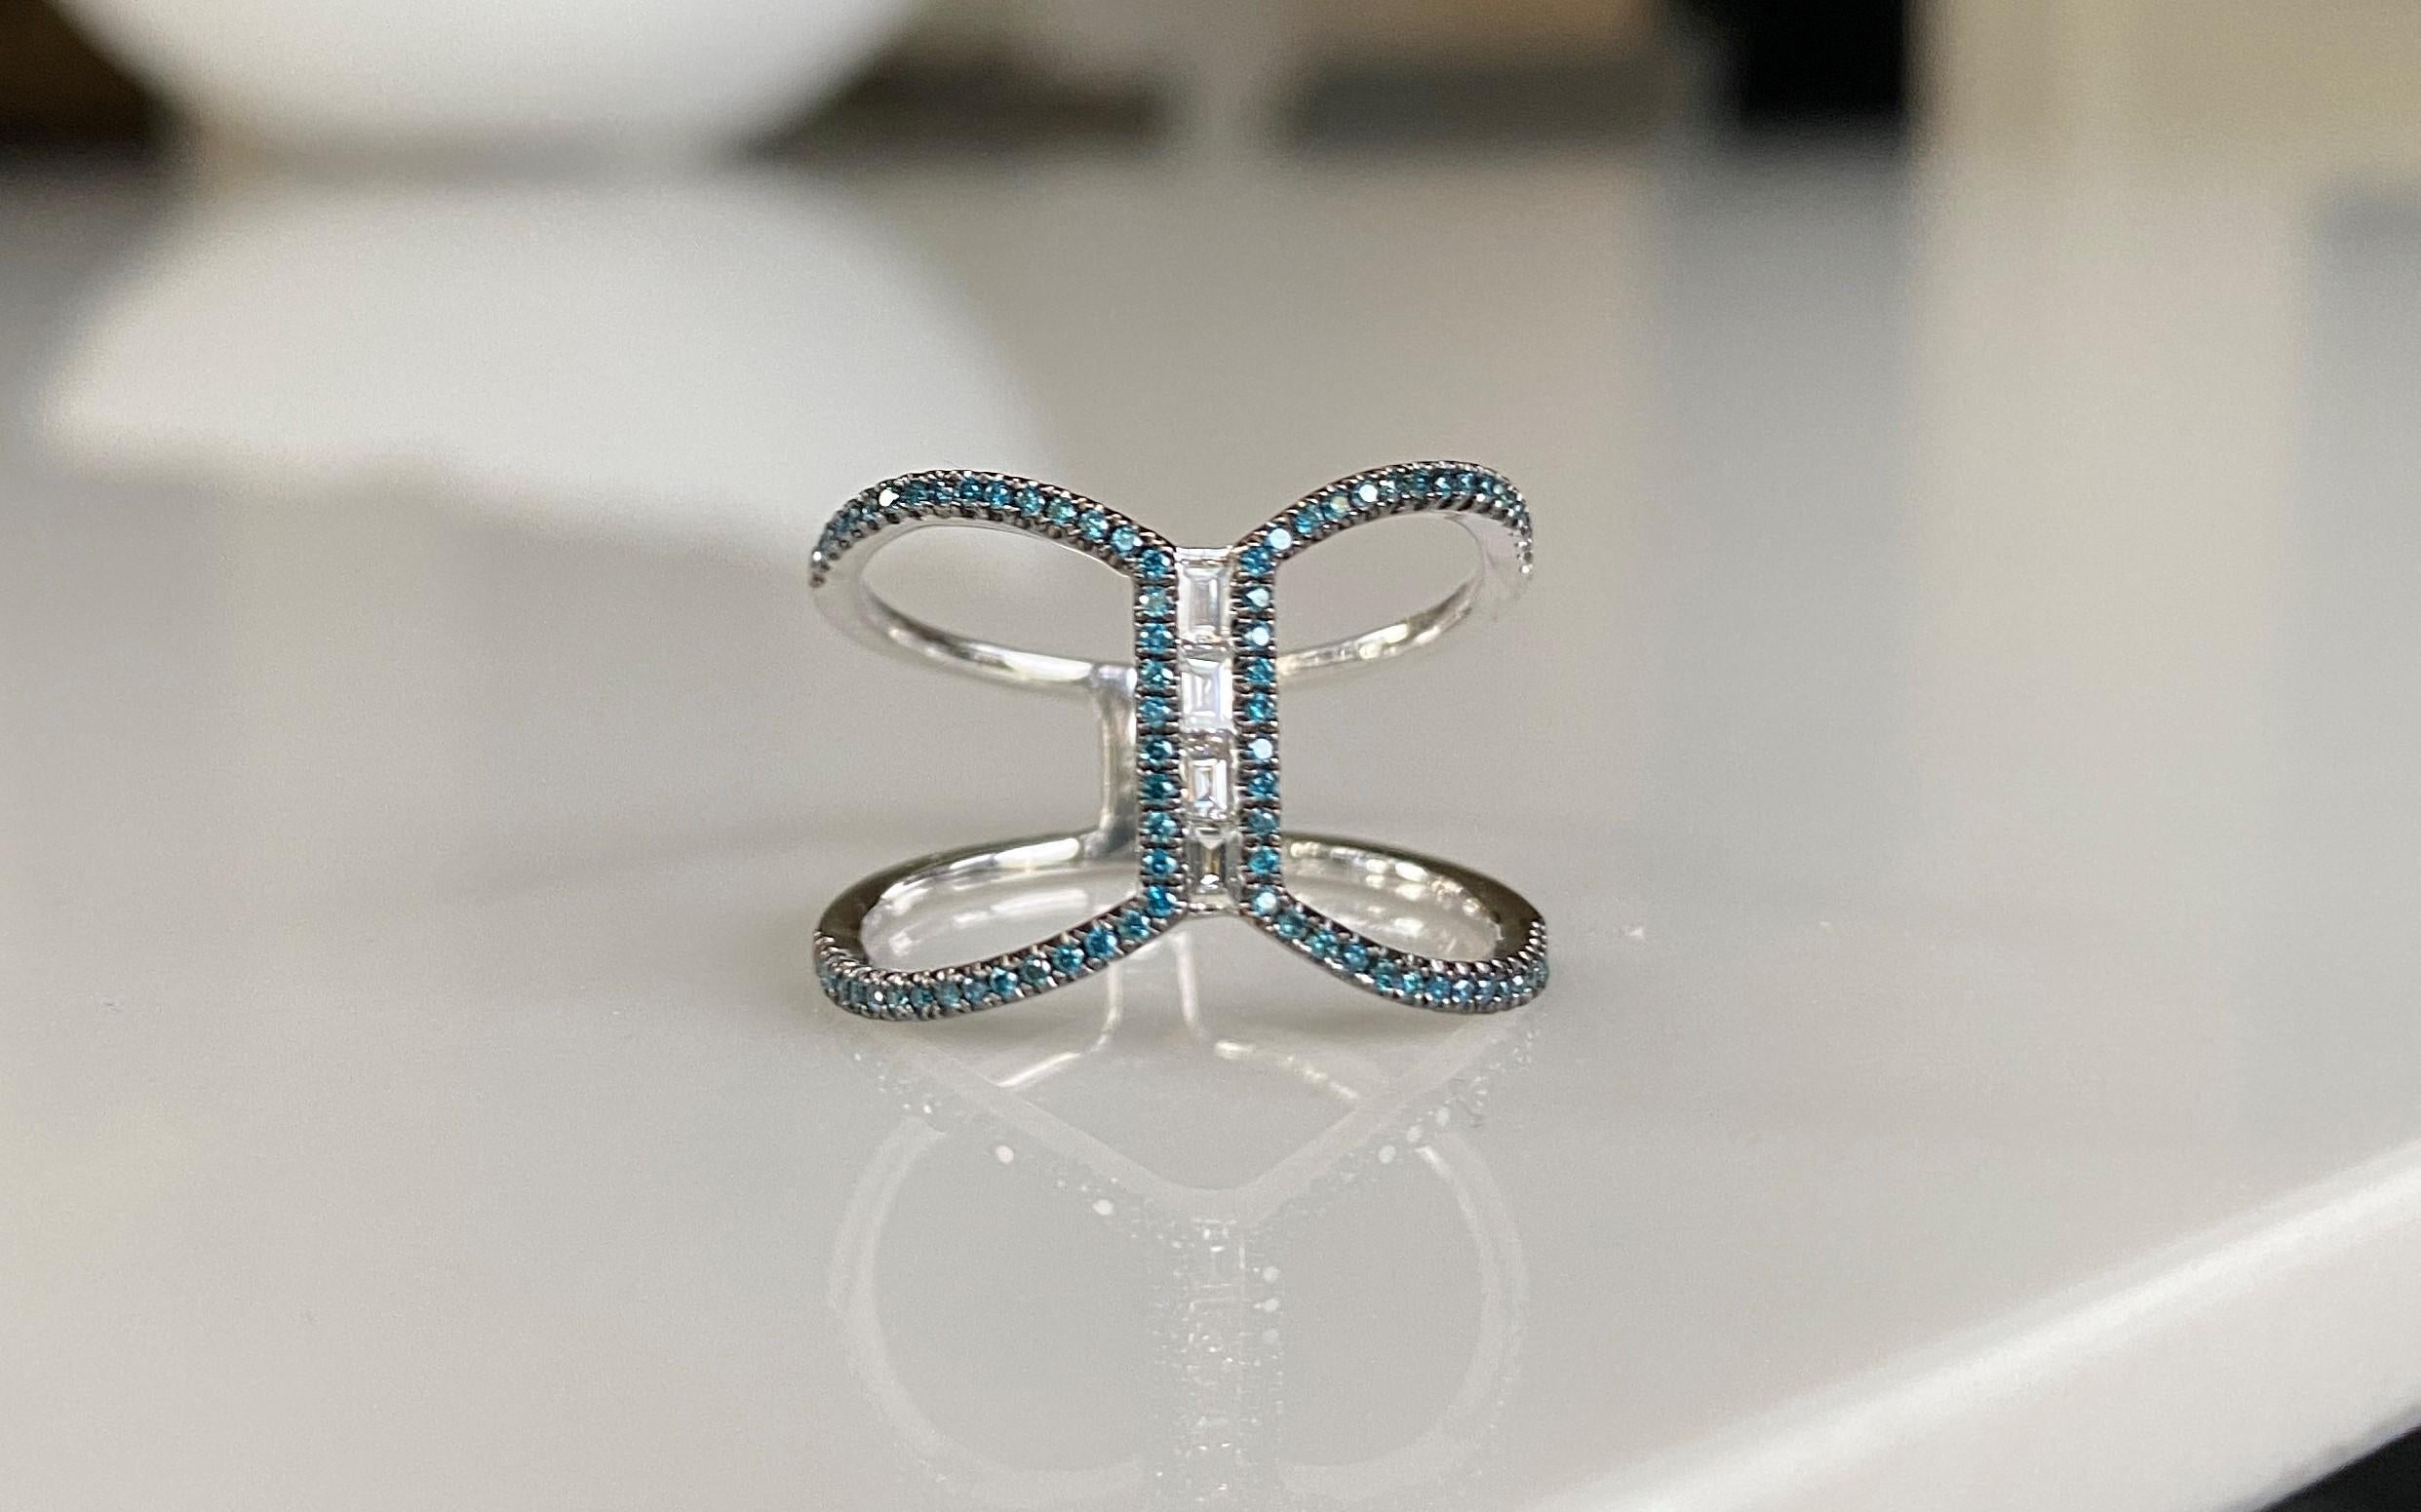 Make a statement with this exquisite ring with pave blue diamonds and generously sized white diamond baguettes. Dress up or down, wear it as a cordial ring or alternative bridal ring.  